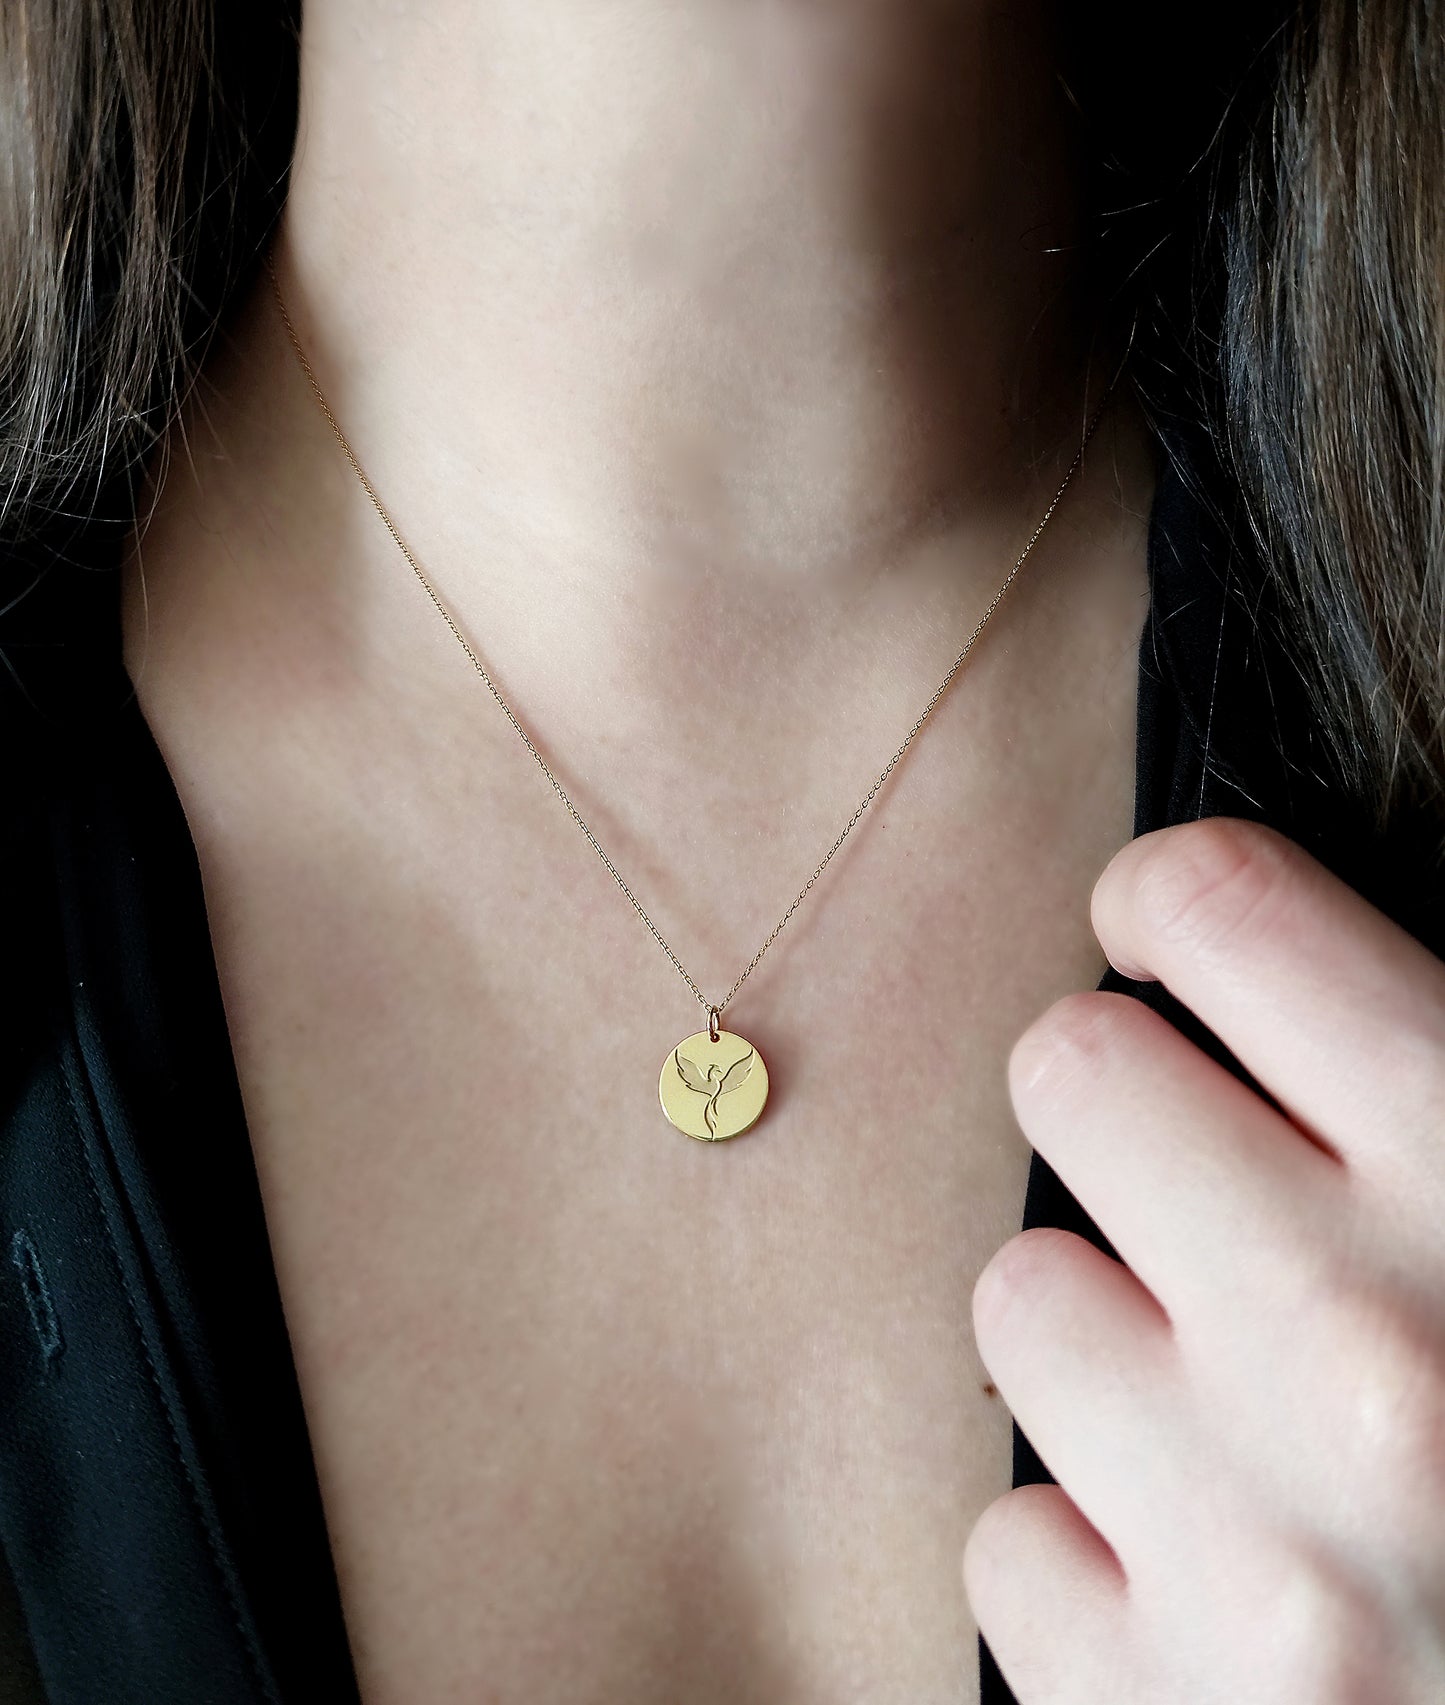 Woman wearing a necklace with a disc pendant engraved with a phoenix firebird